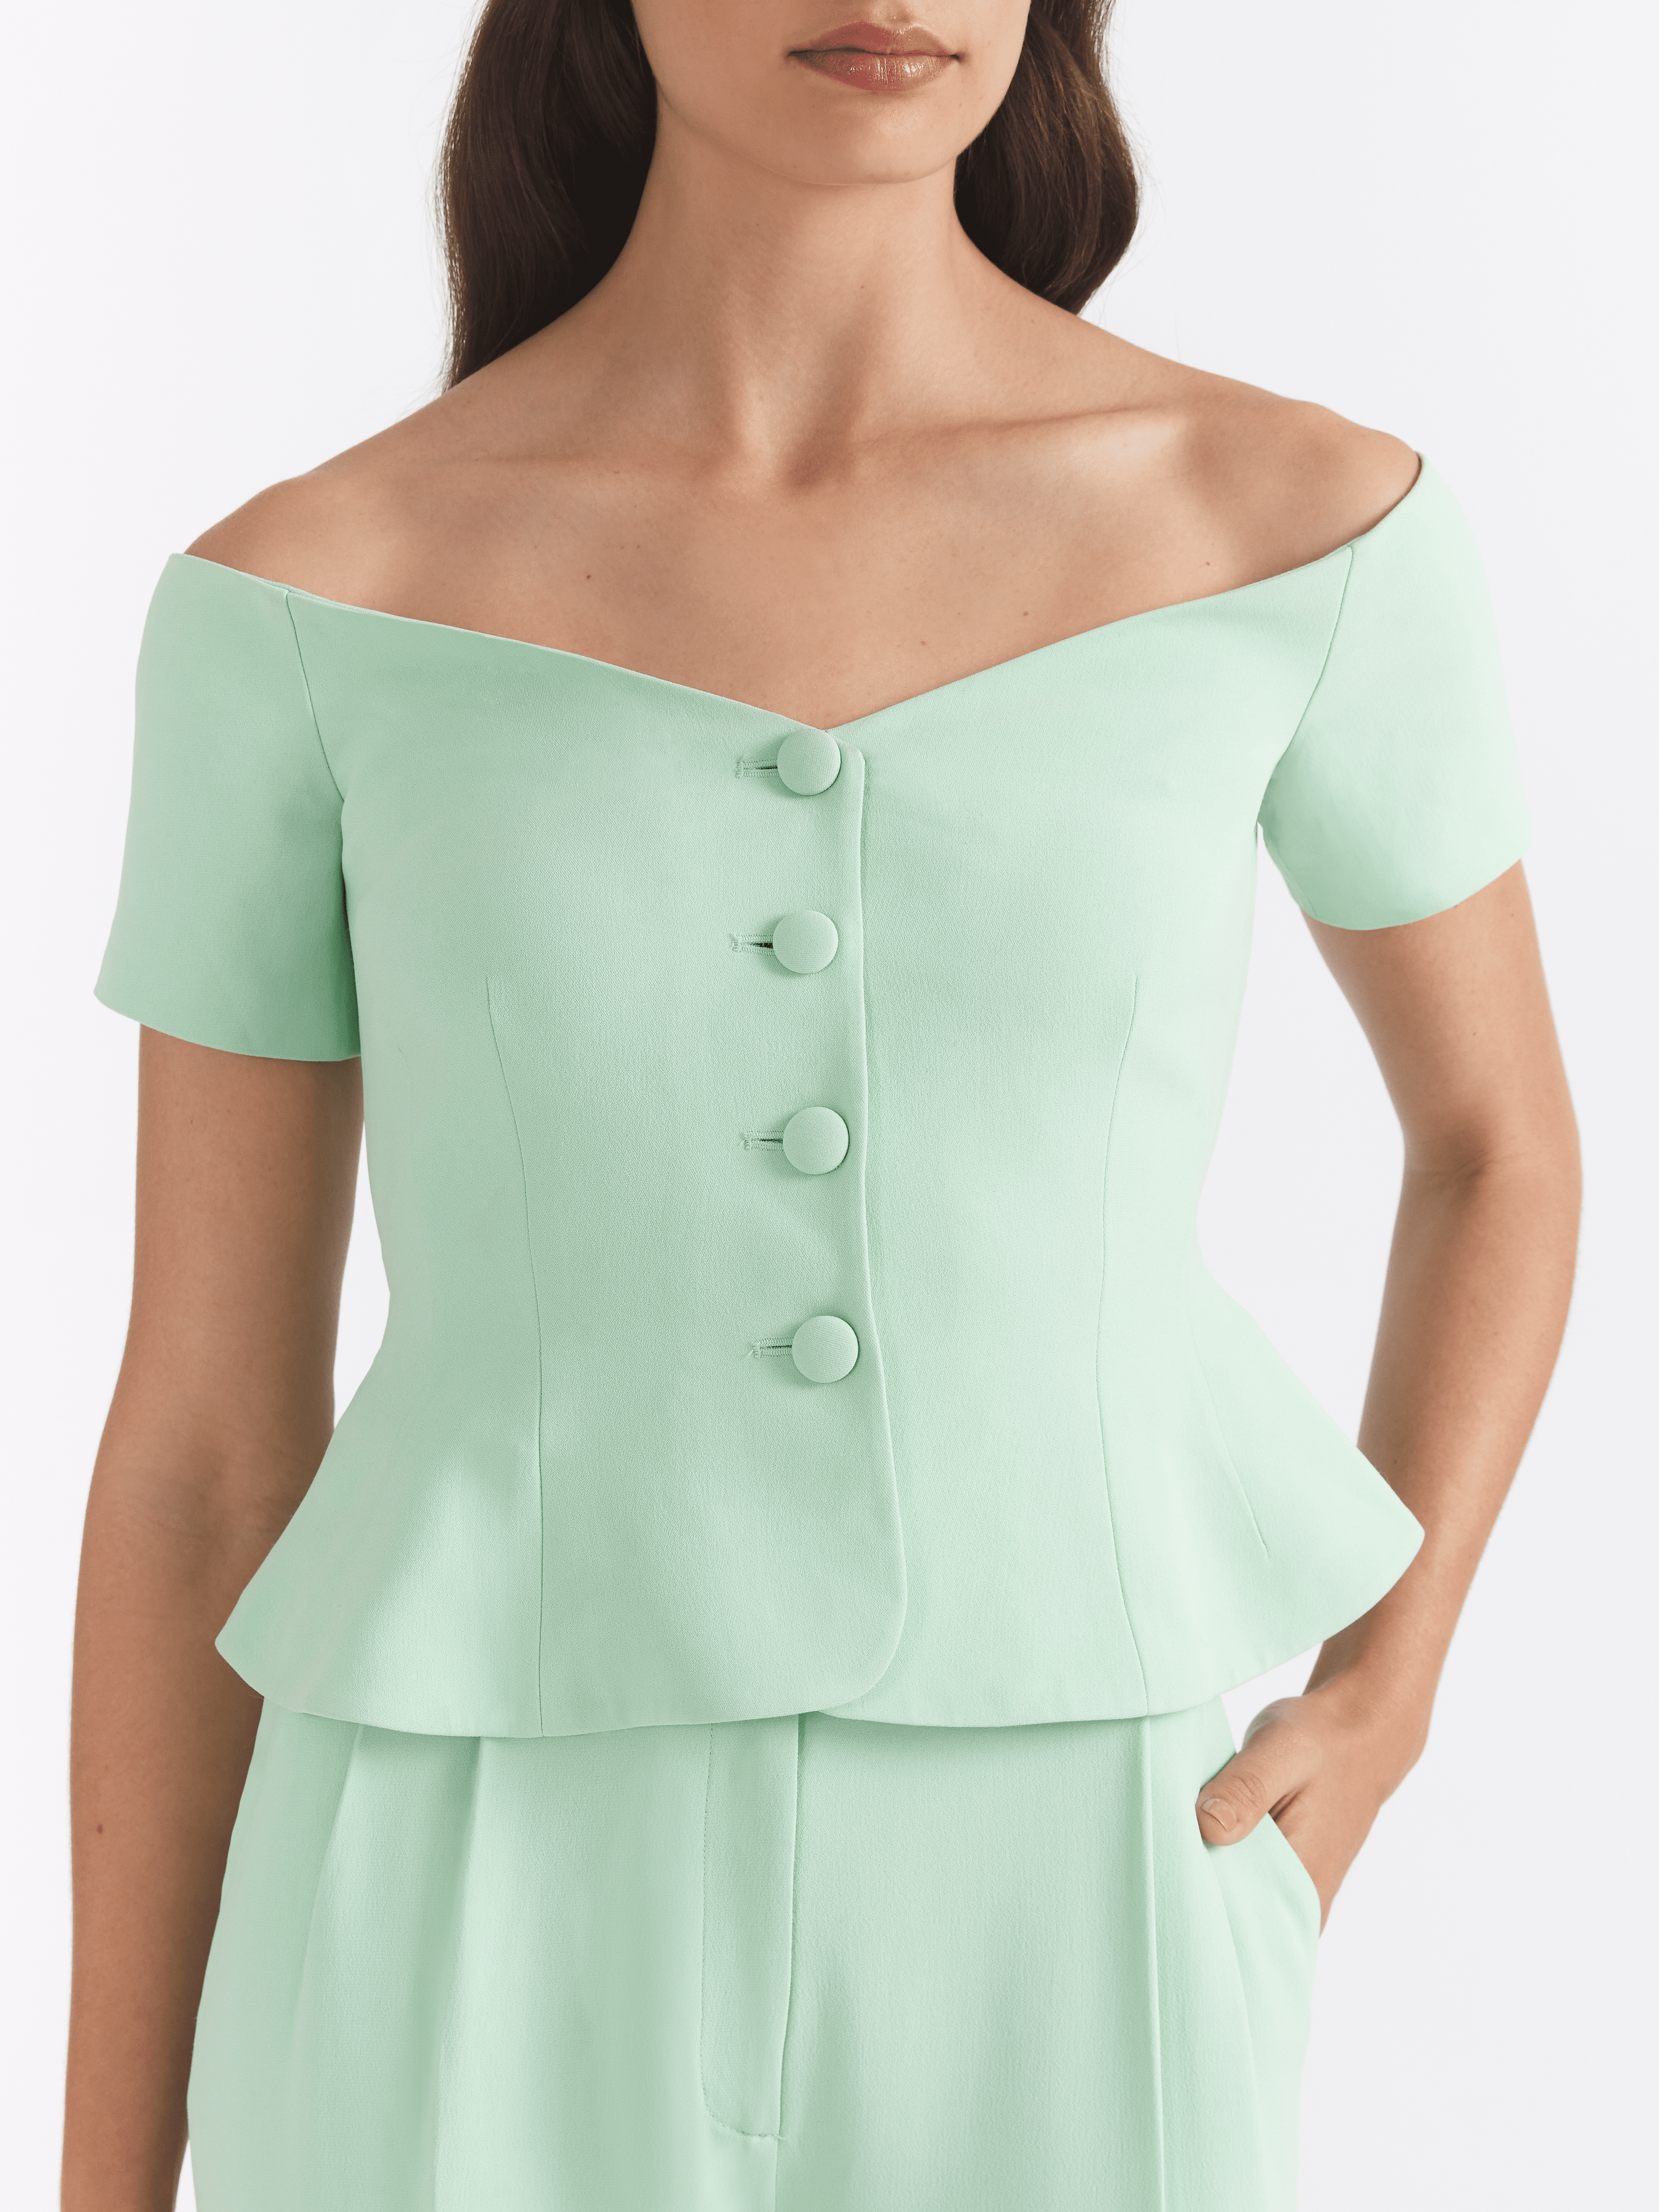 Clementine Top in Mint